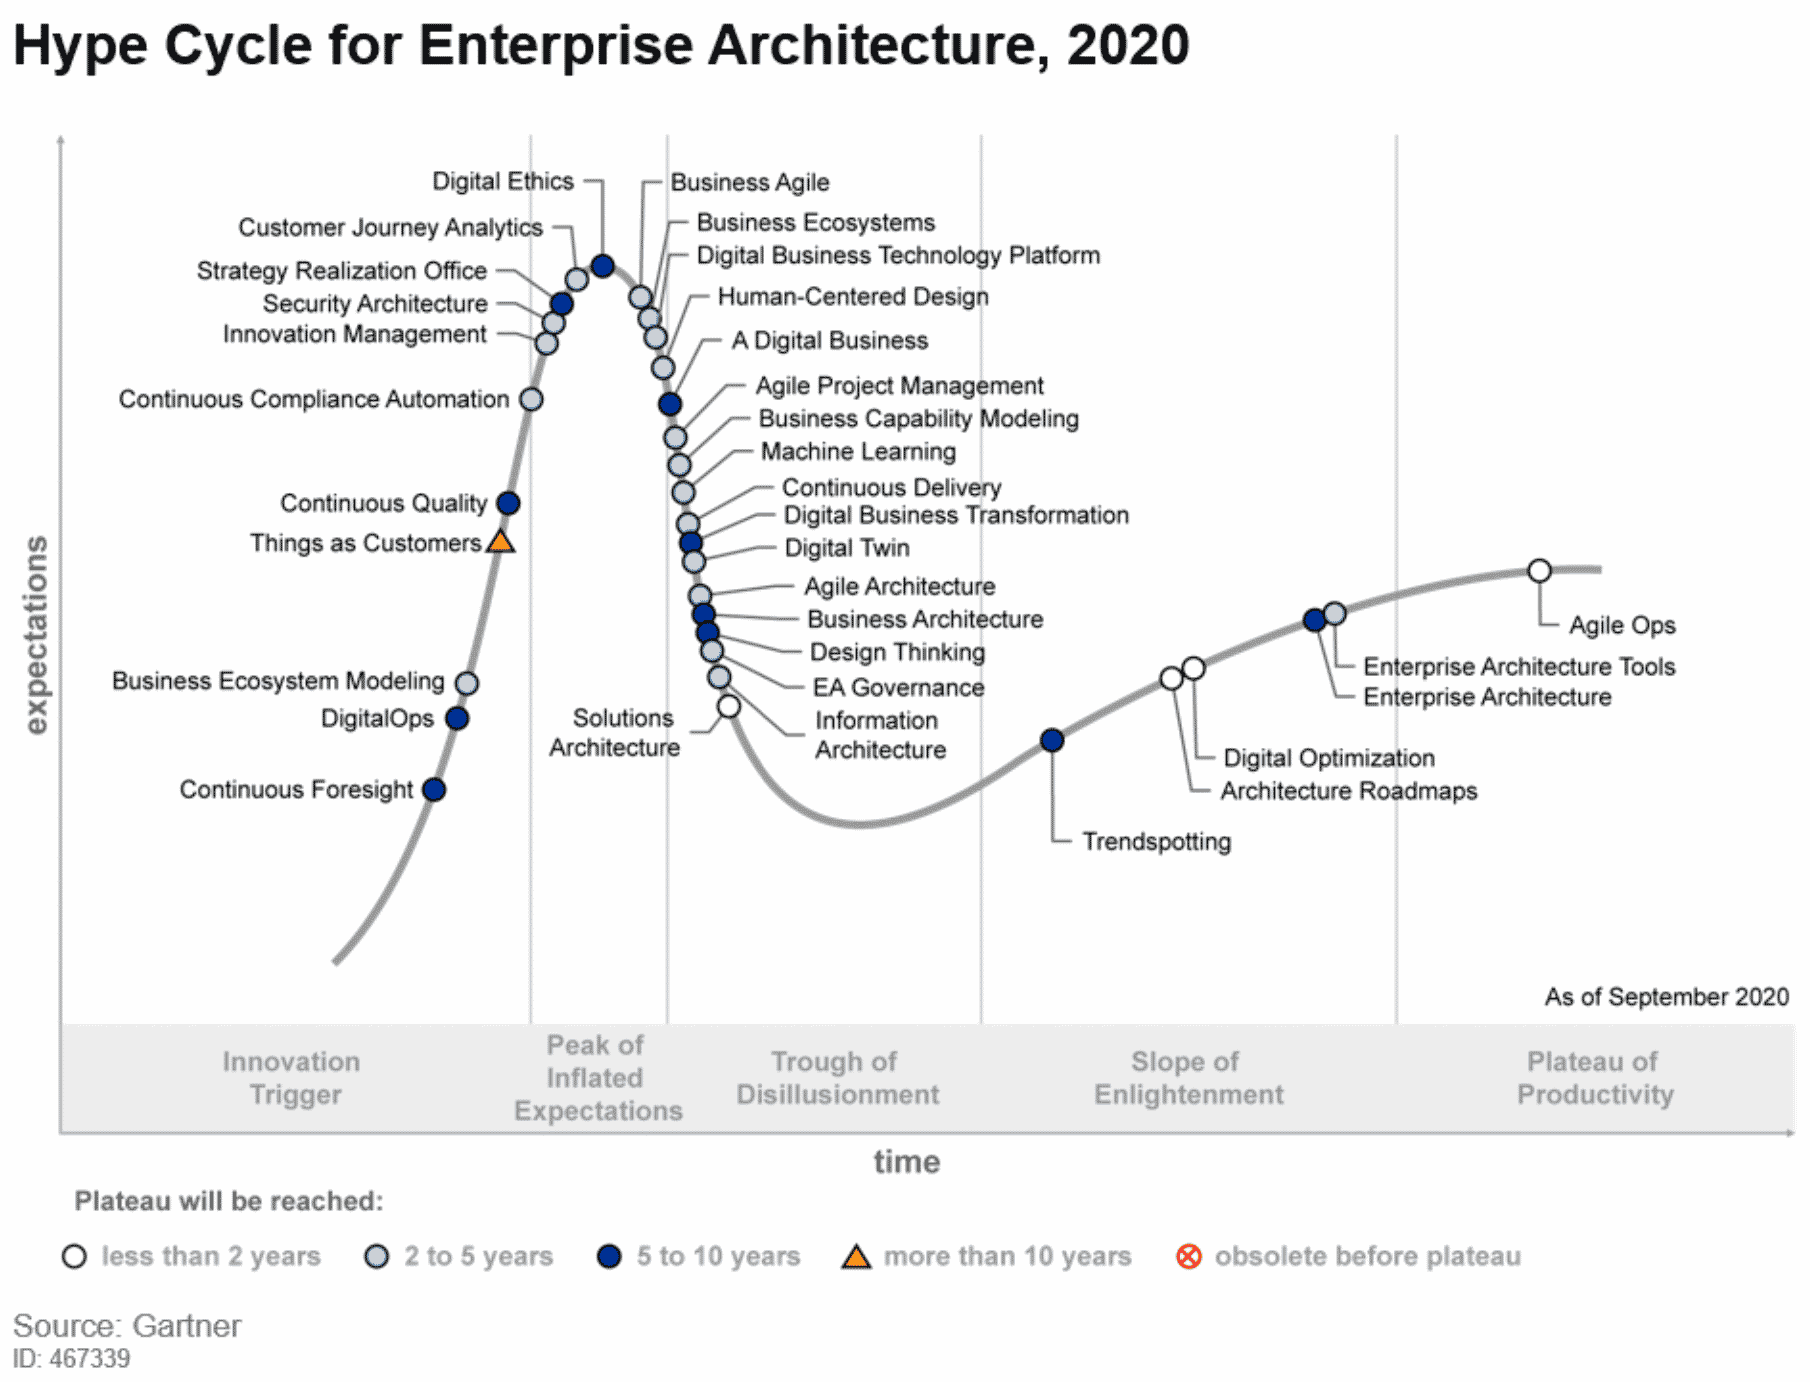 Hype Cycle for Enterprise Architecture 2020 Header